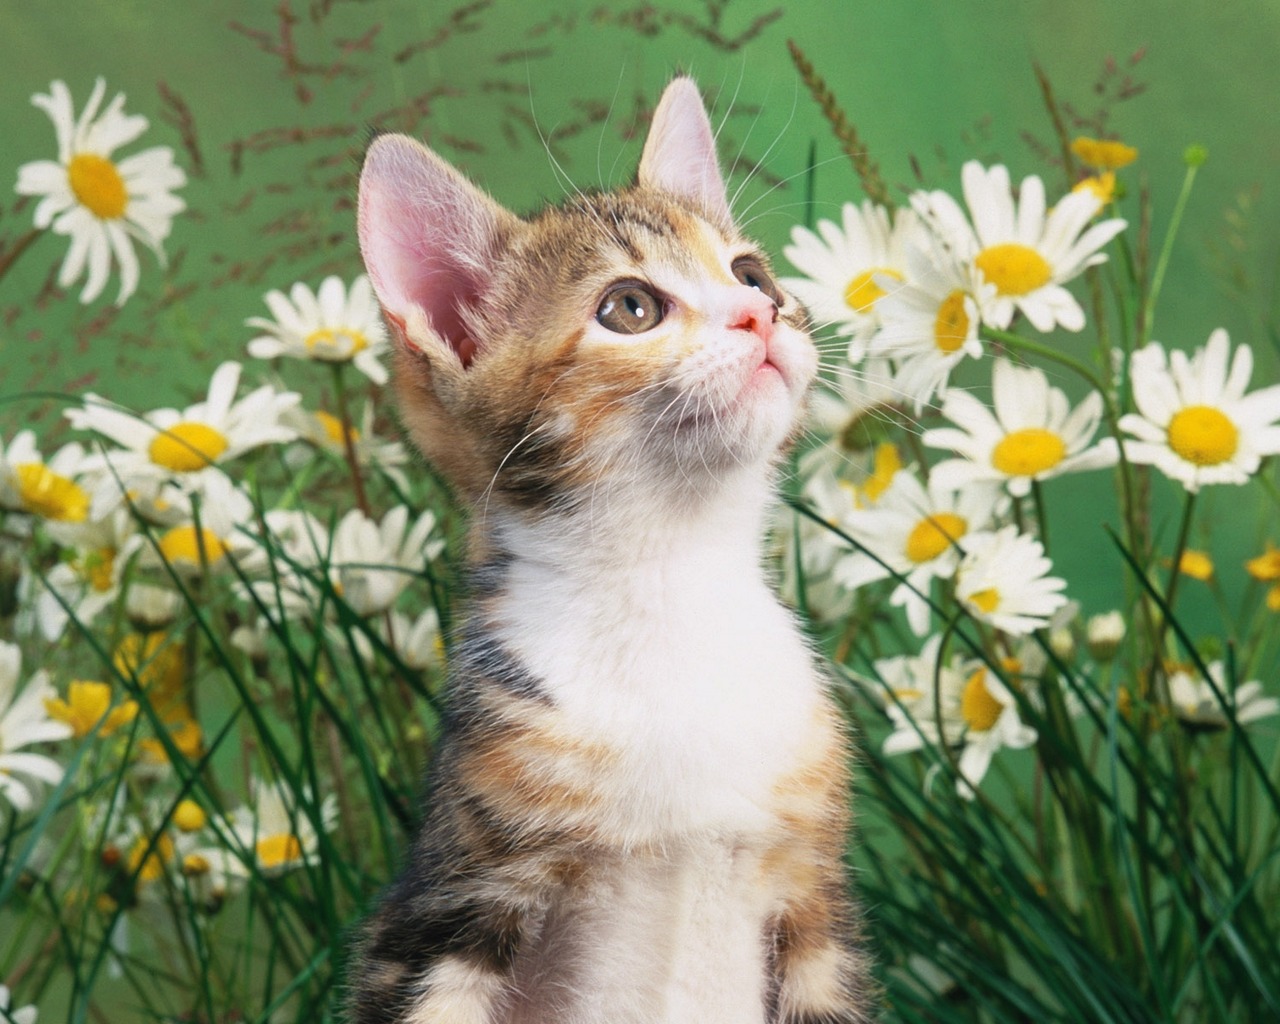 And High Definition Wallpaper Of Cats Dogs You Love The Most